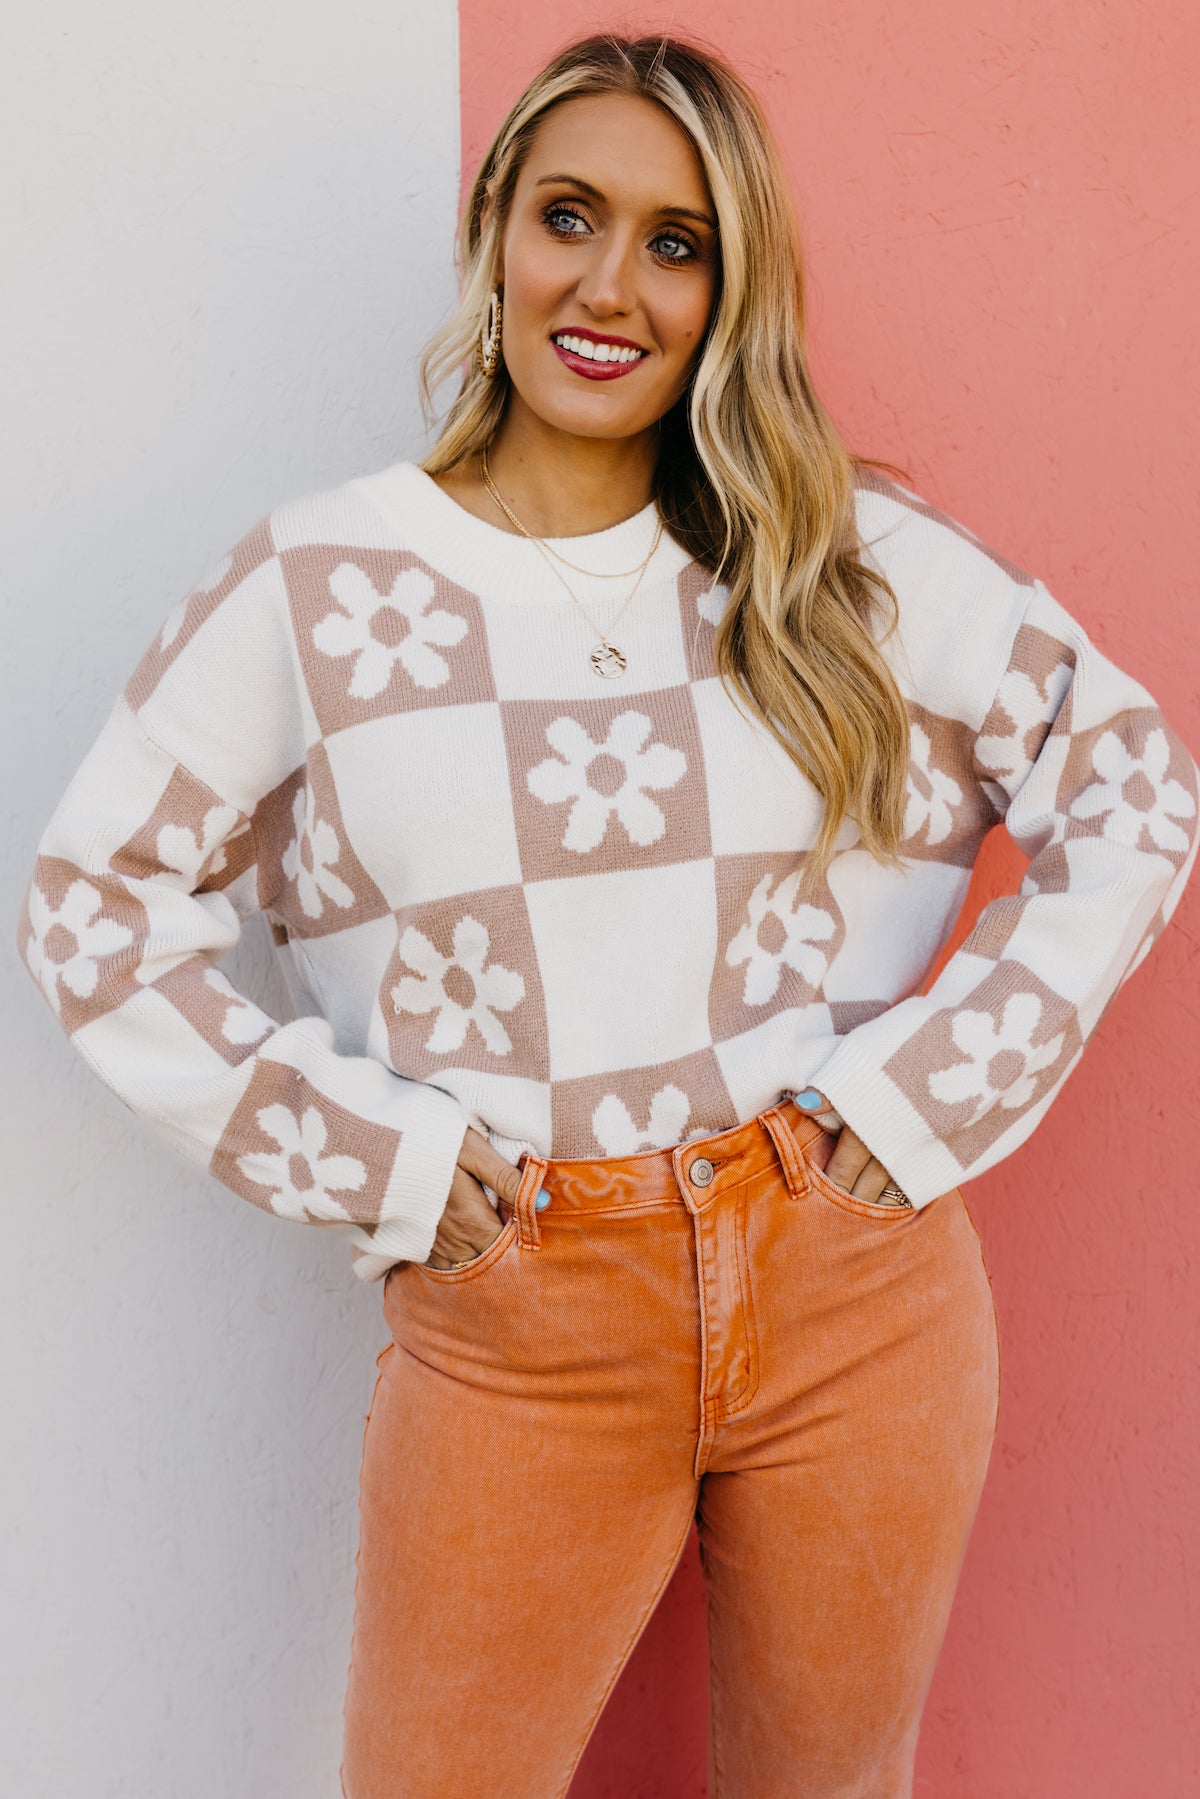 The Leon Floral Checkered Sweater